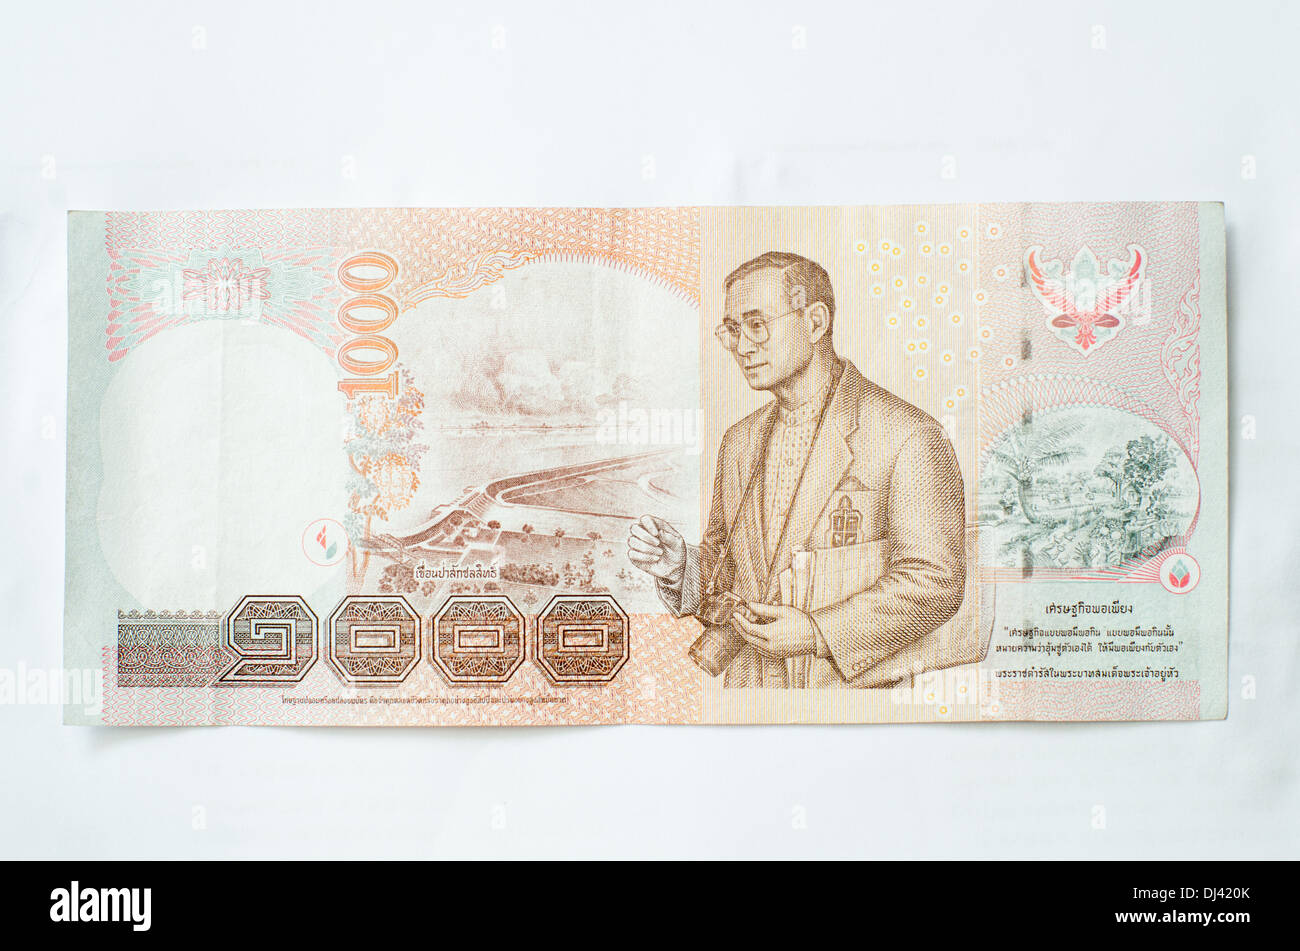 Close up of thailand currency, thai baht with the images of Thailand King. Denomination of 1000 bahts. Stock Photo